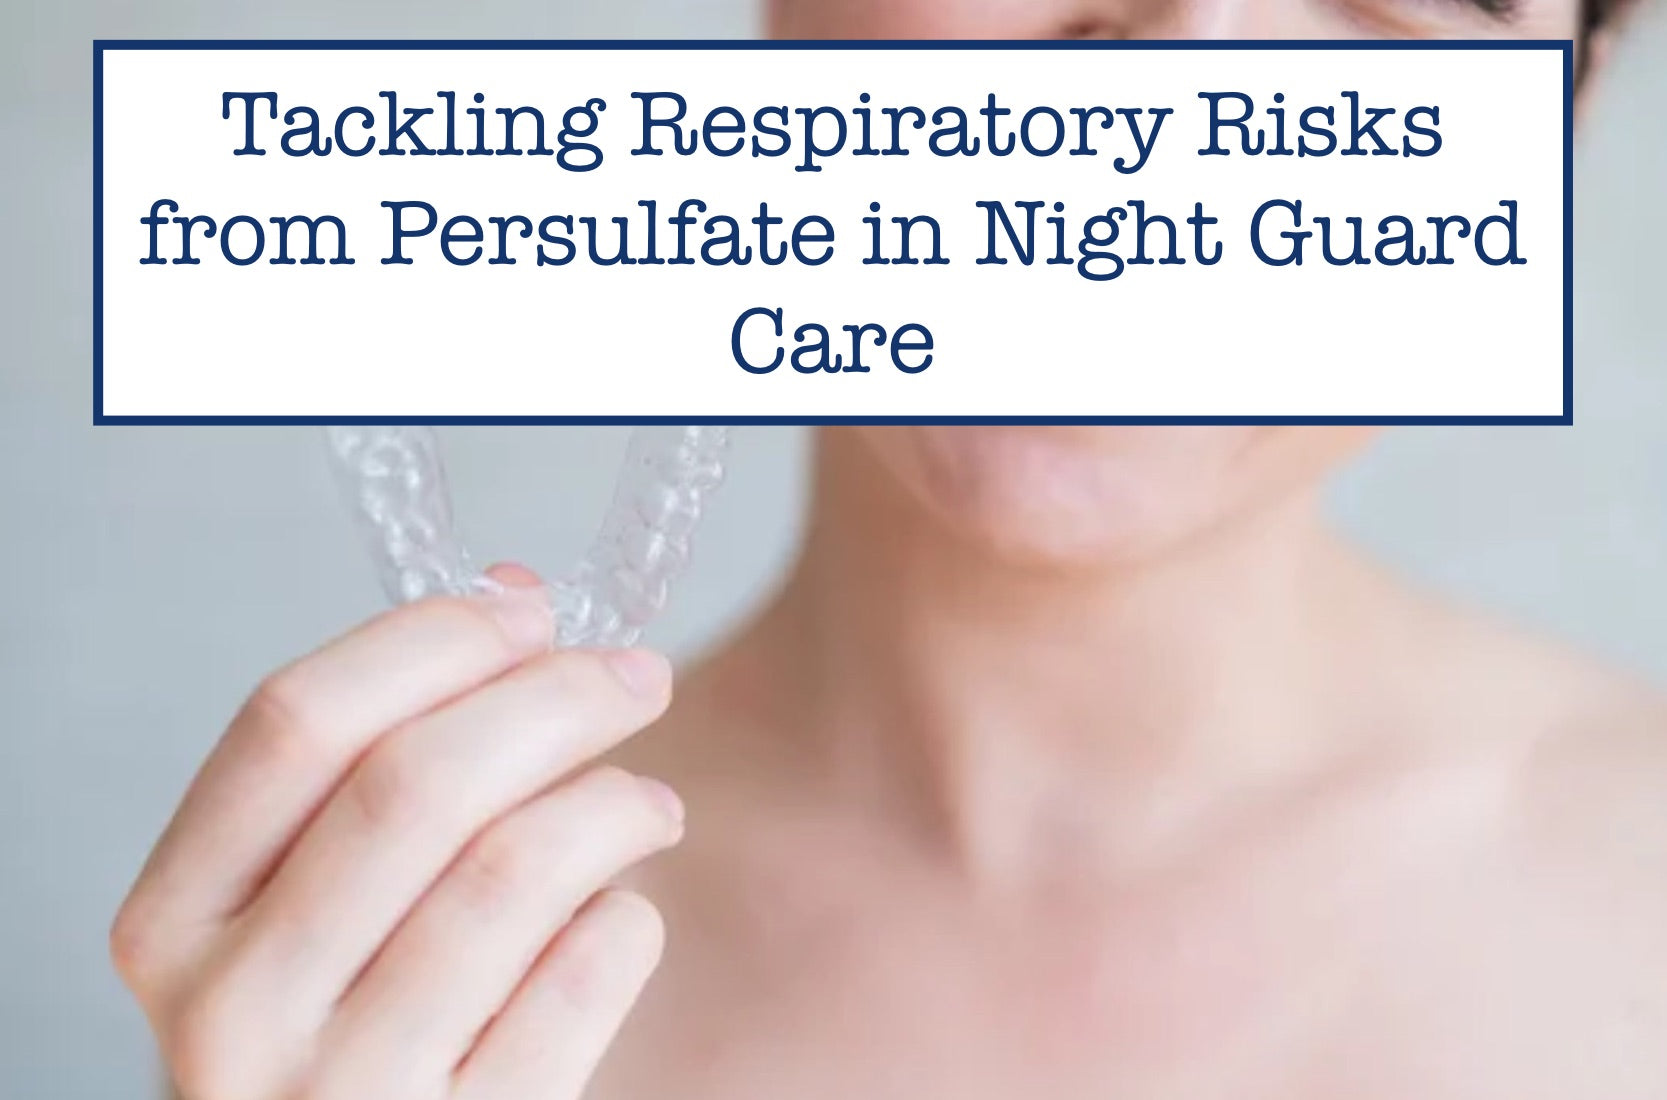 Tackling Respiratory Risks from Persulfate in Night Guard Care